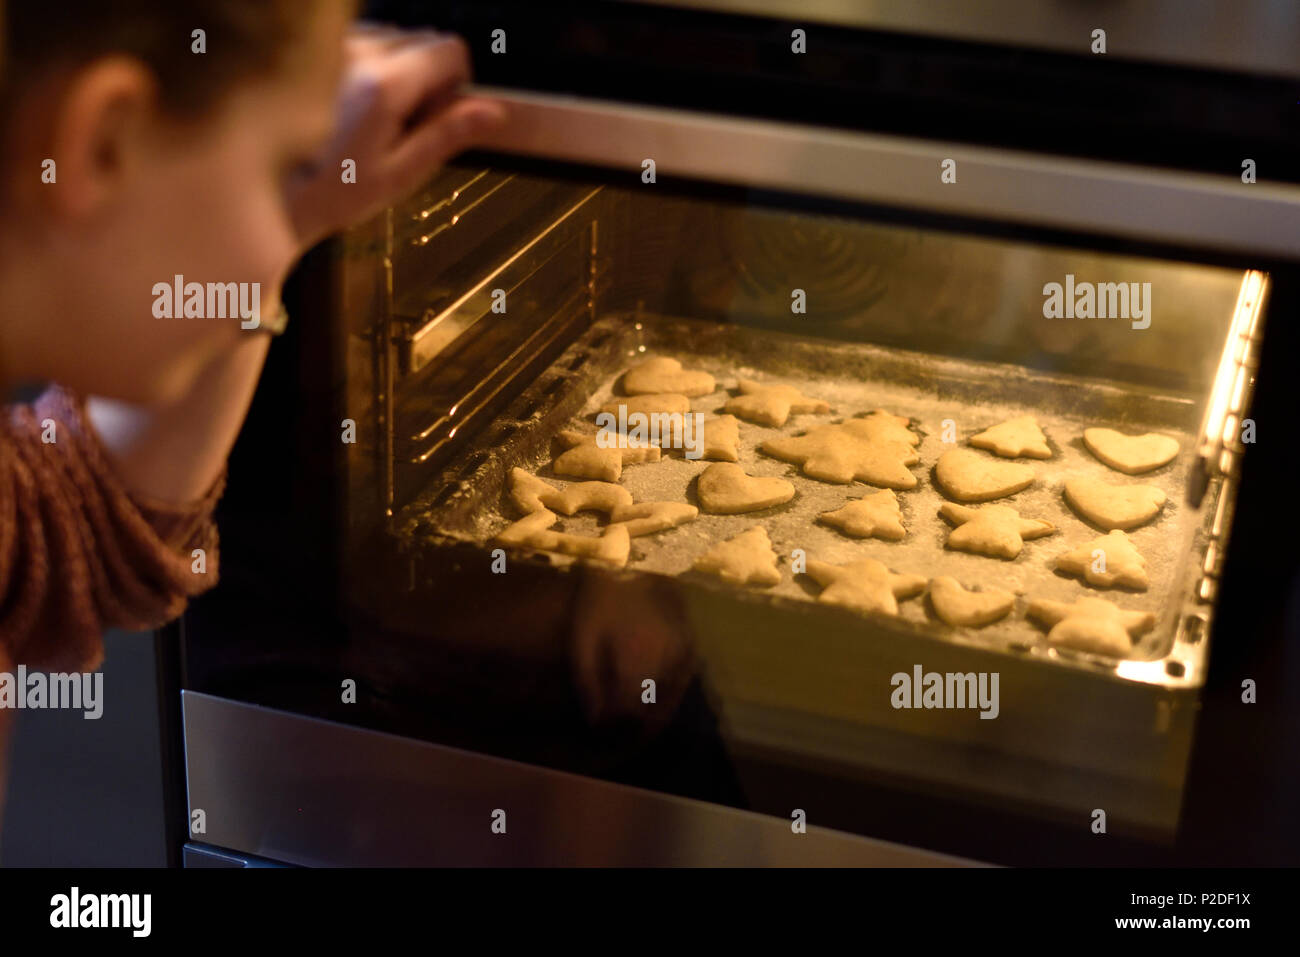 11 ans Filles baking christmas cookies, Hambourg, Allemagne Banque D'Images